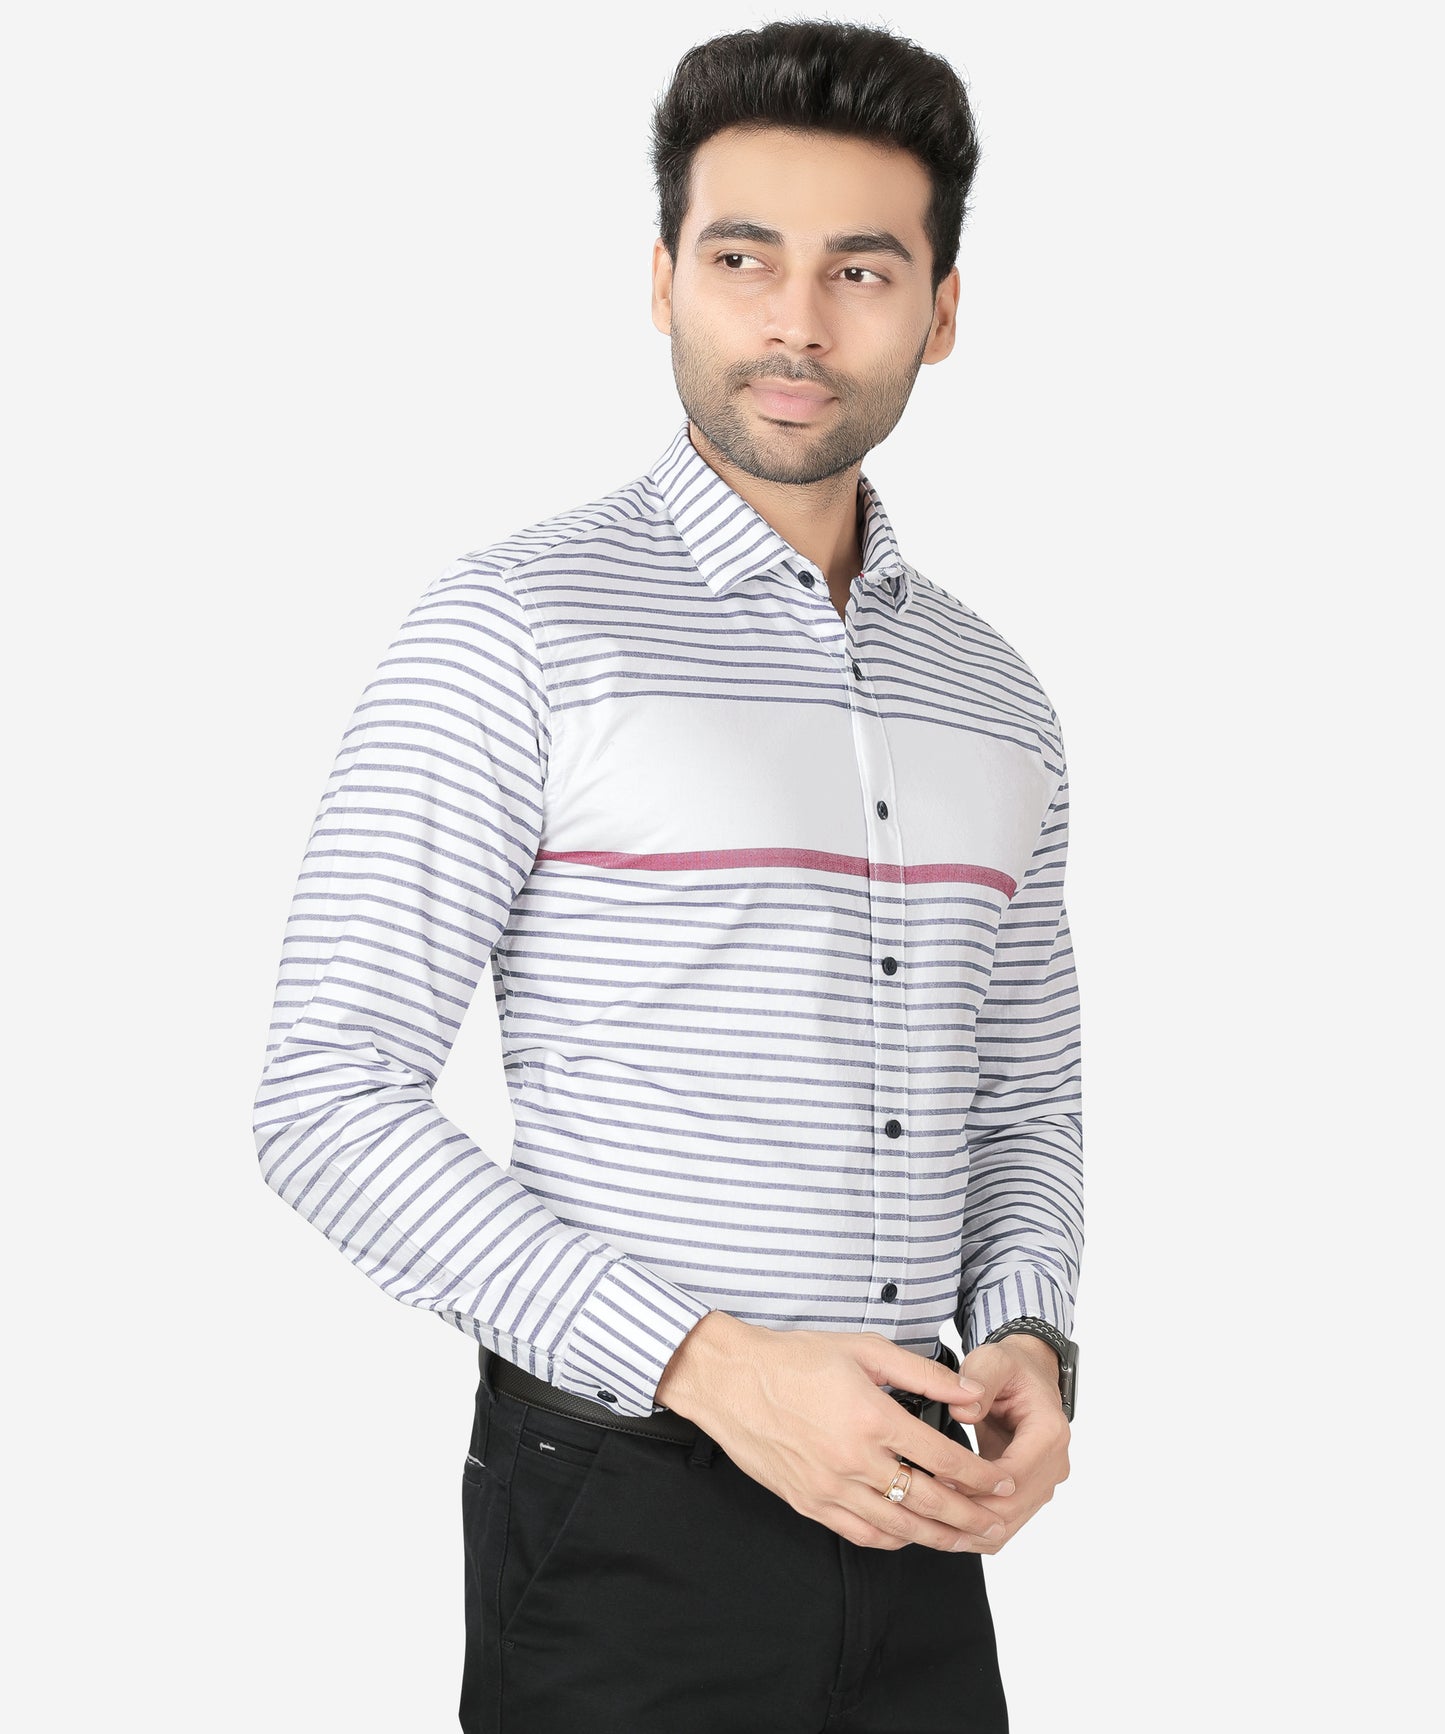 5thanfold Men's Formal Pure Cotton Full Sleeve Striped White Slim Fit Shirt